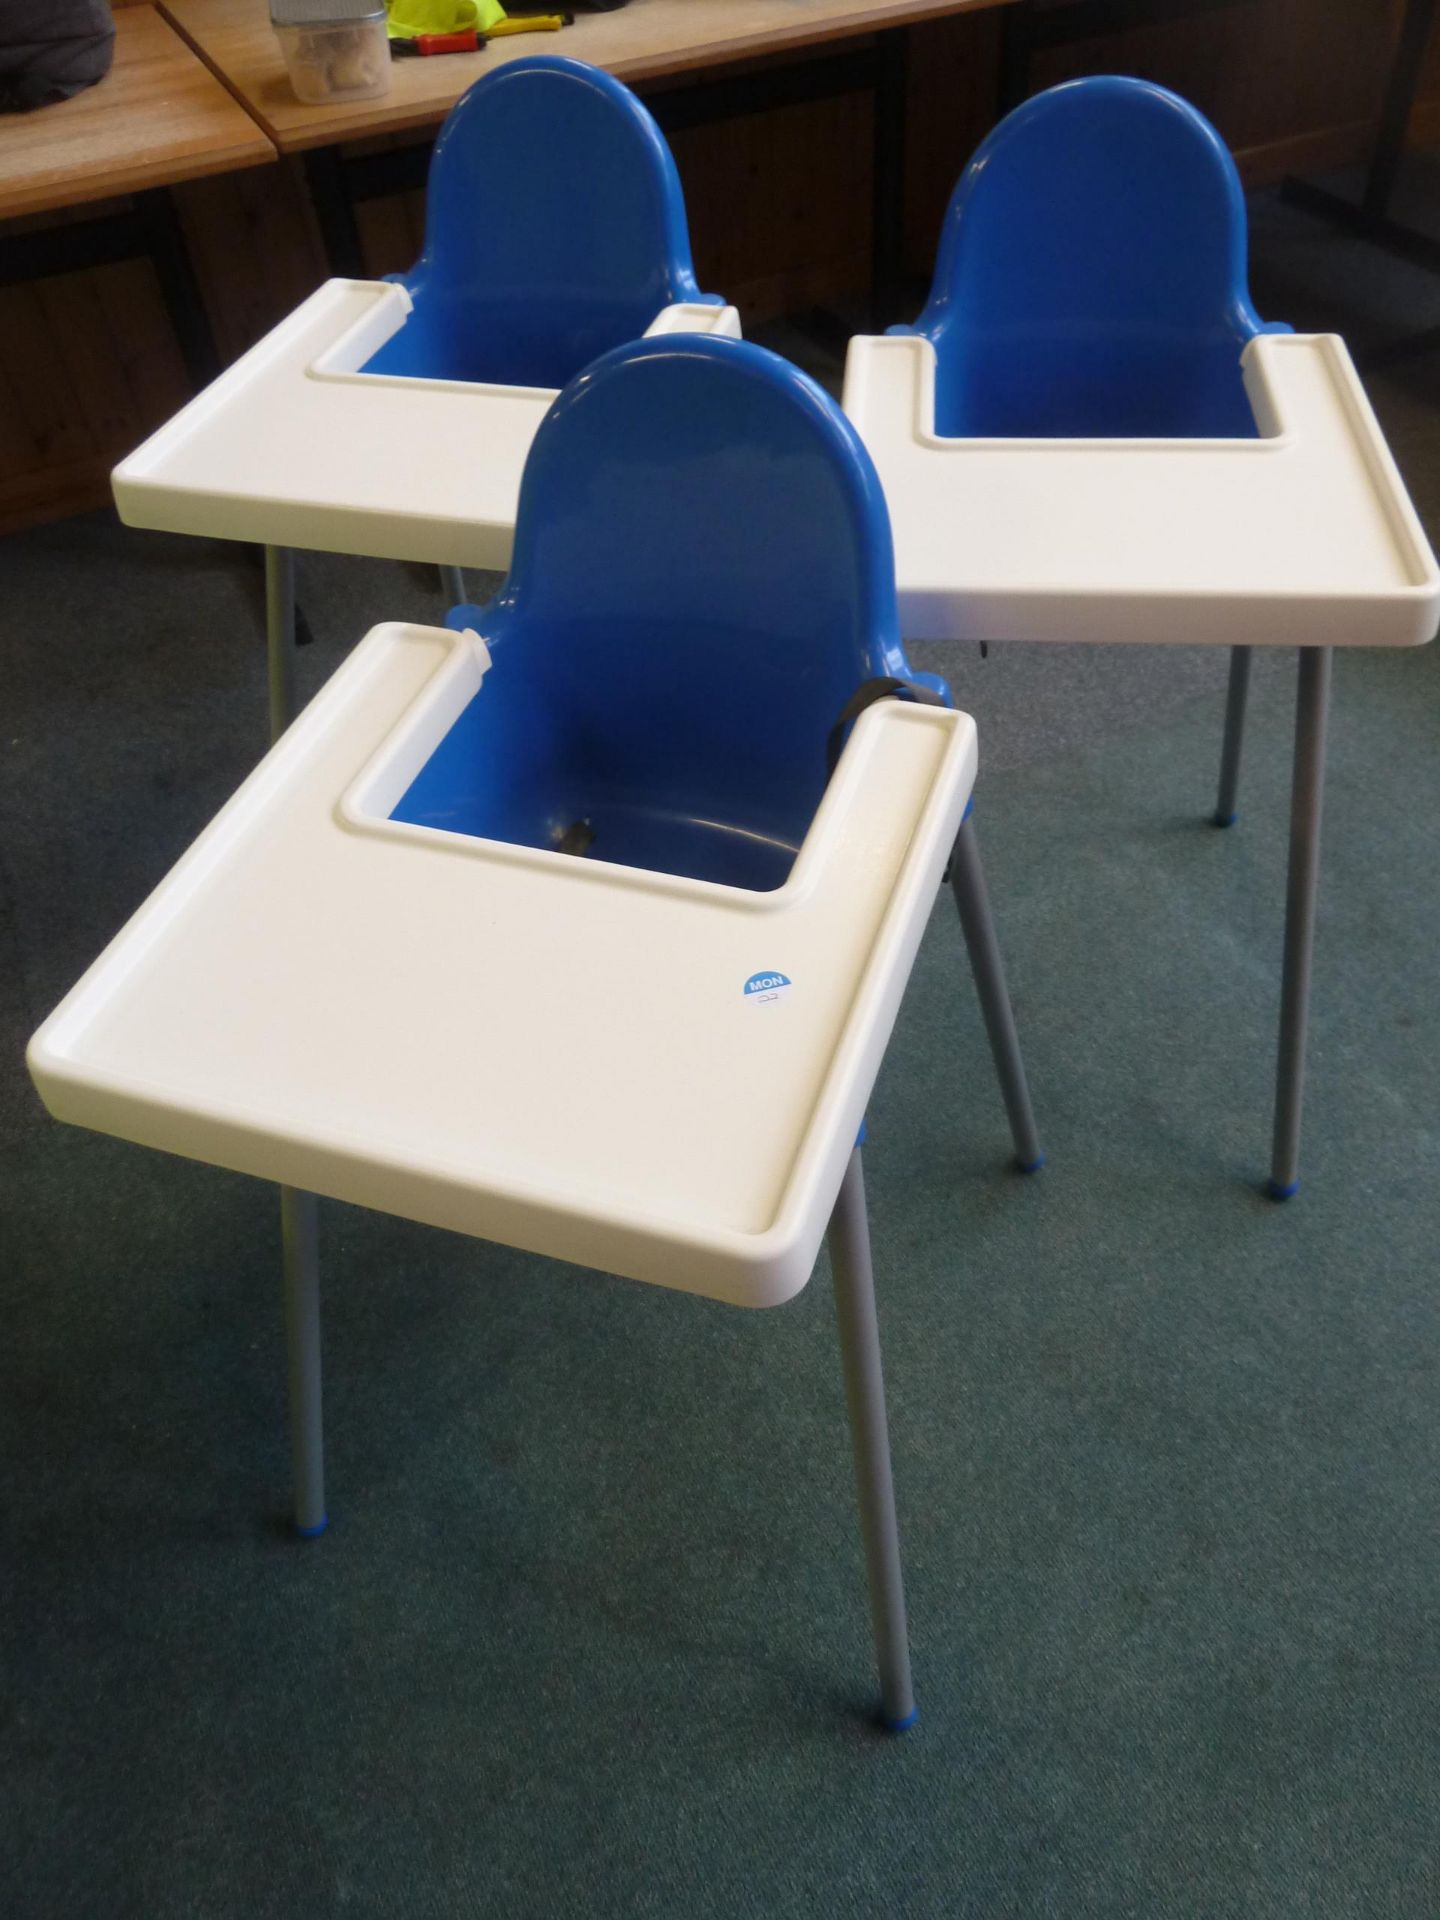 *3 x blue and white plastic high chairs with metal legs